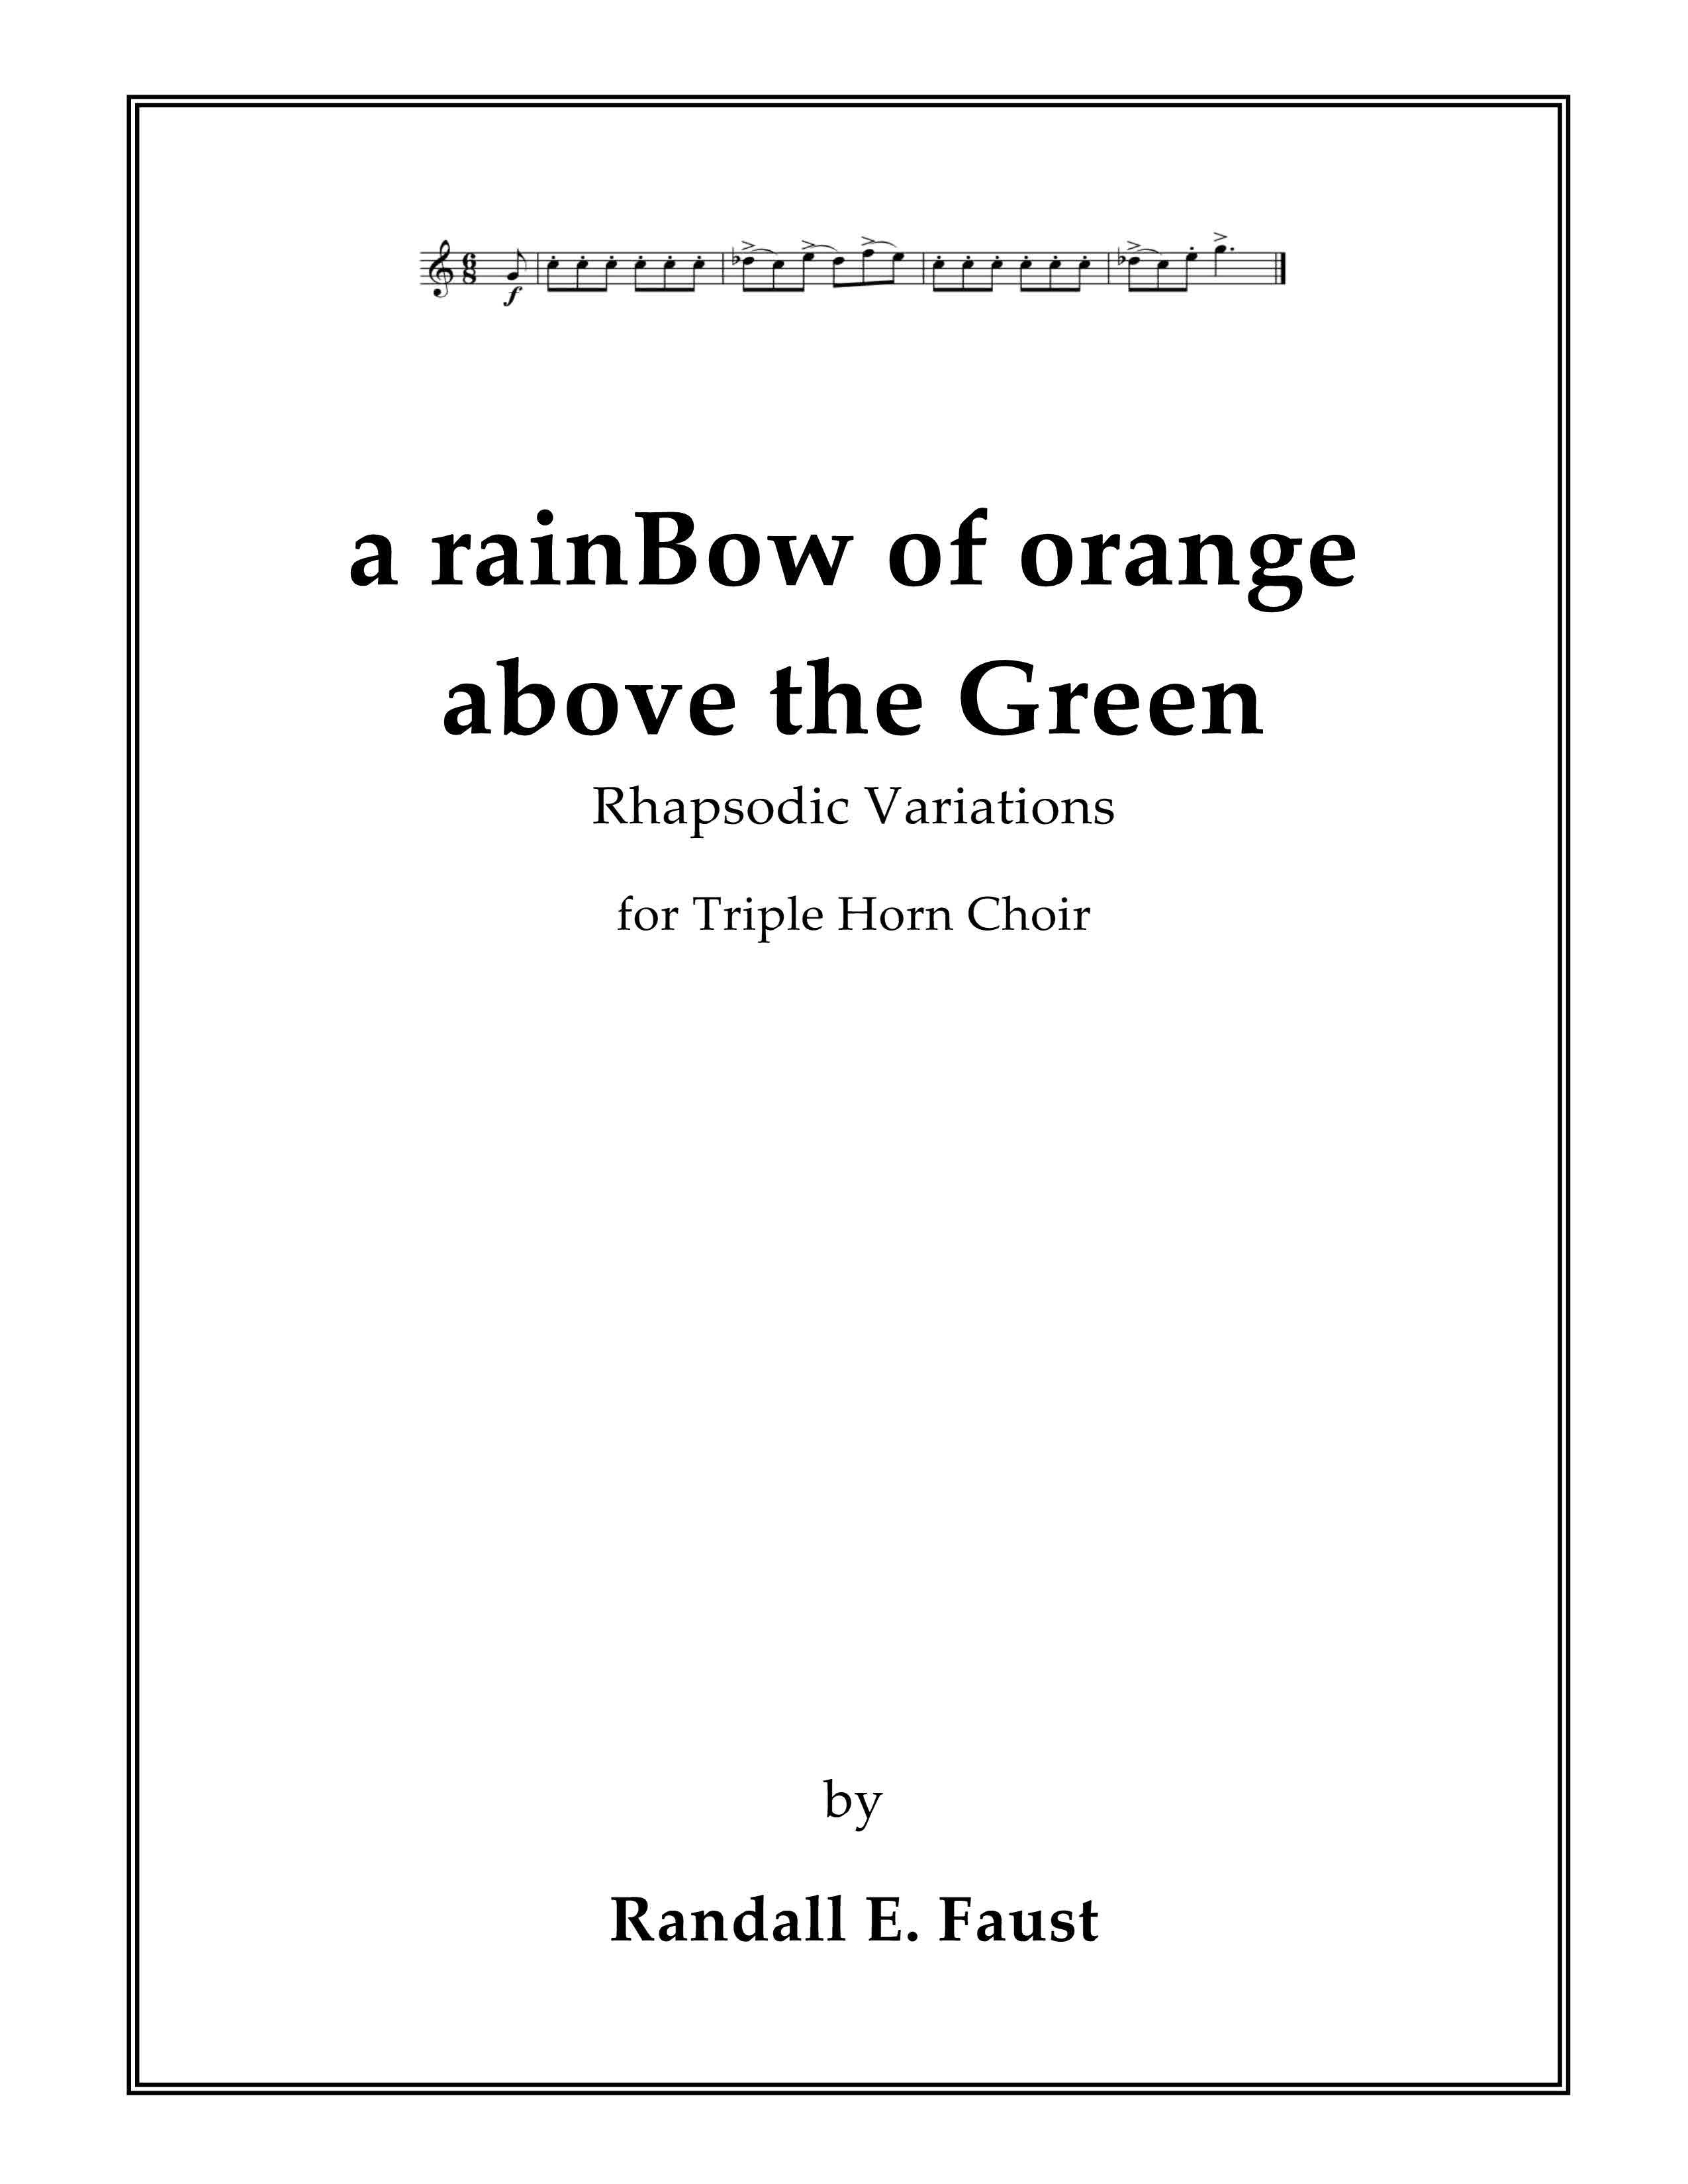 a rainBow of orange above the Green-Rhapsodic Variations for Triple Horn Choir (2021)